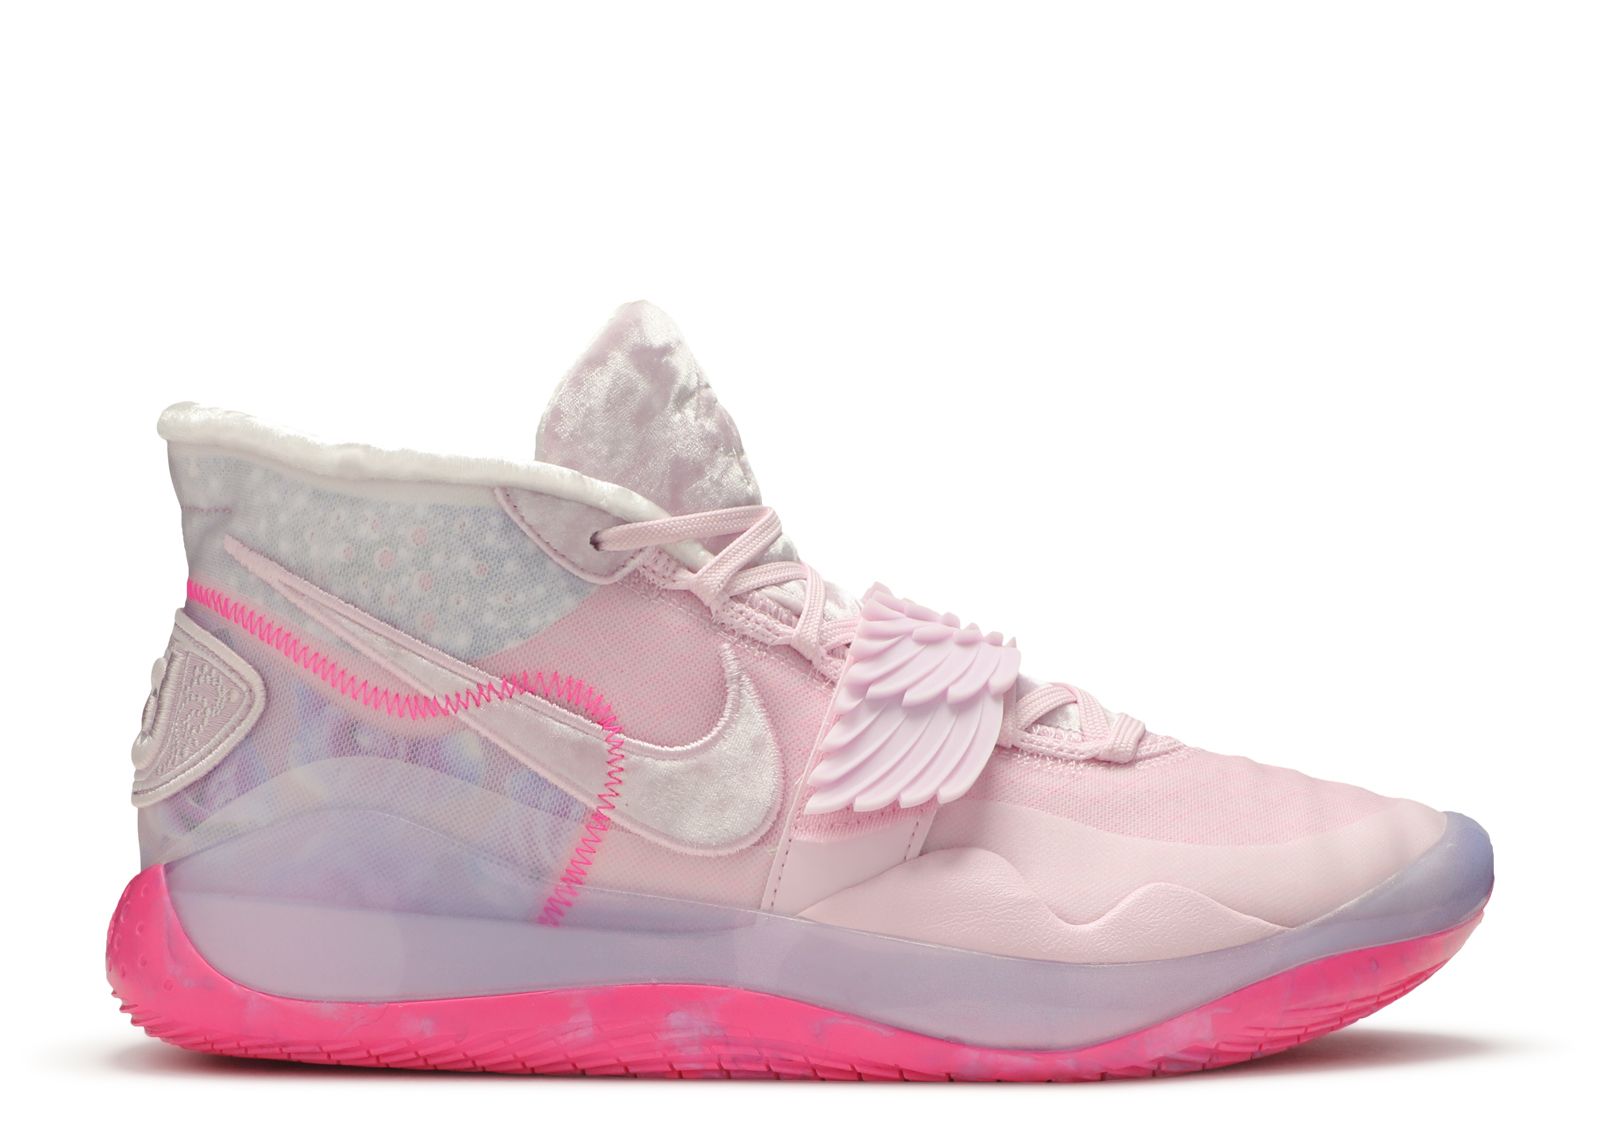 aunt pearl kd 12s